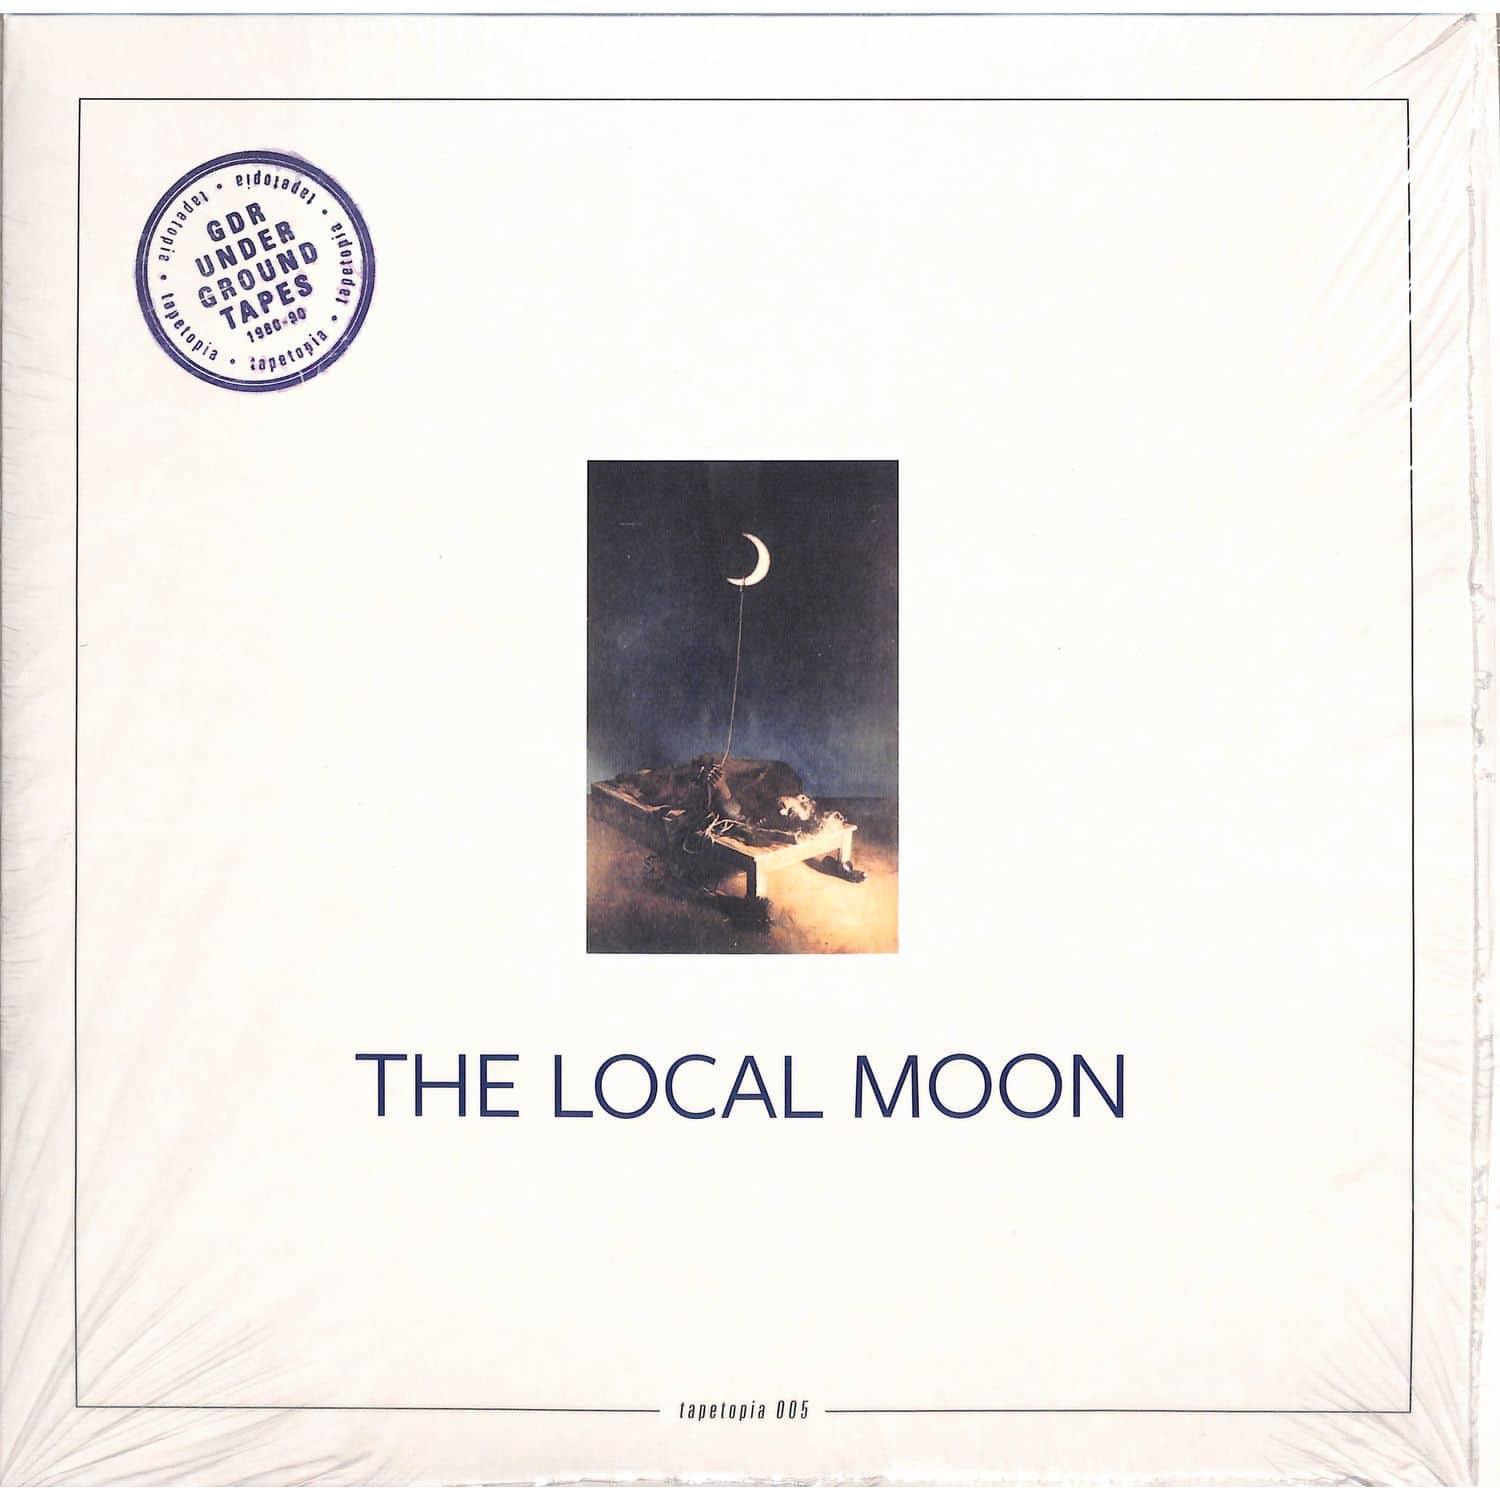 The Local Moon - THE LOCAL MOON 